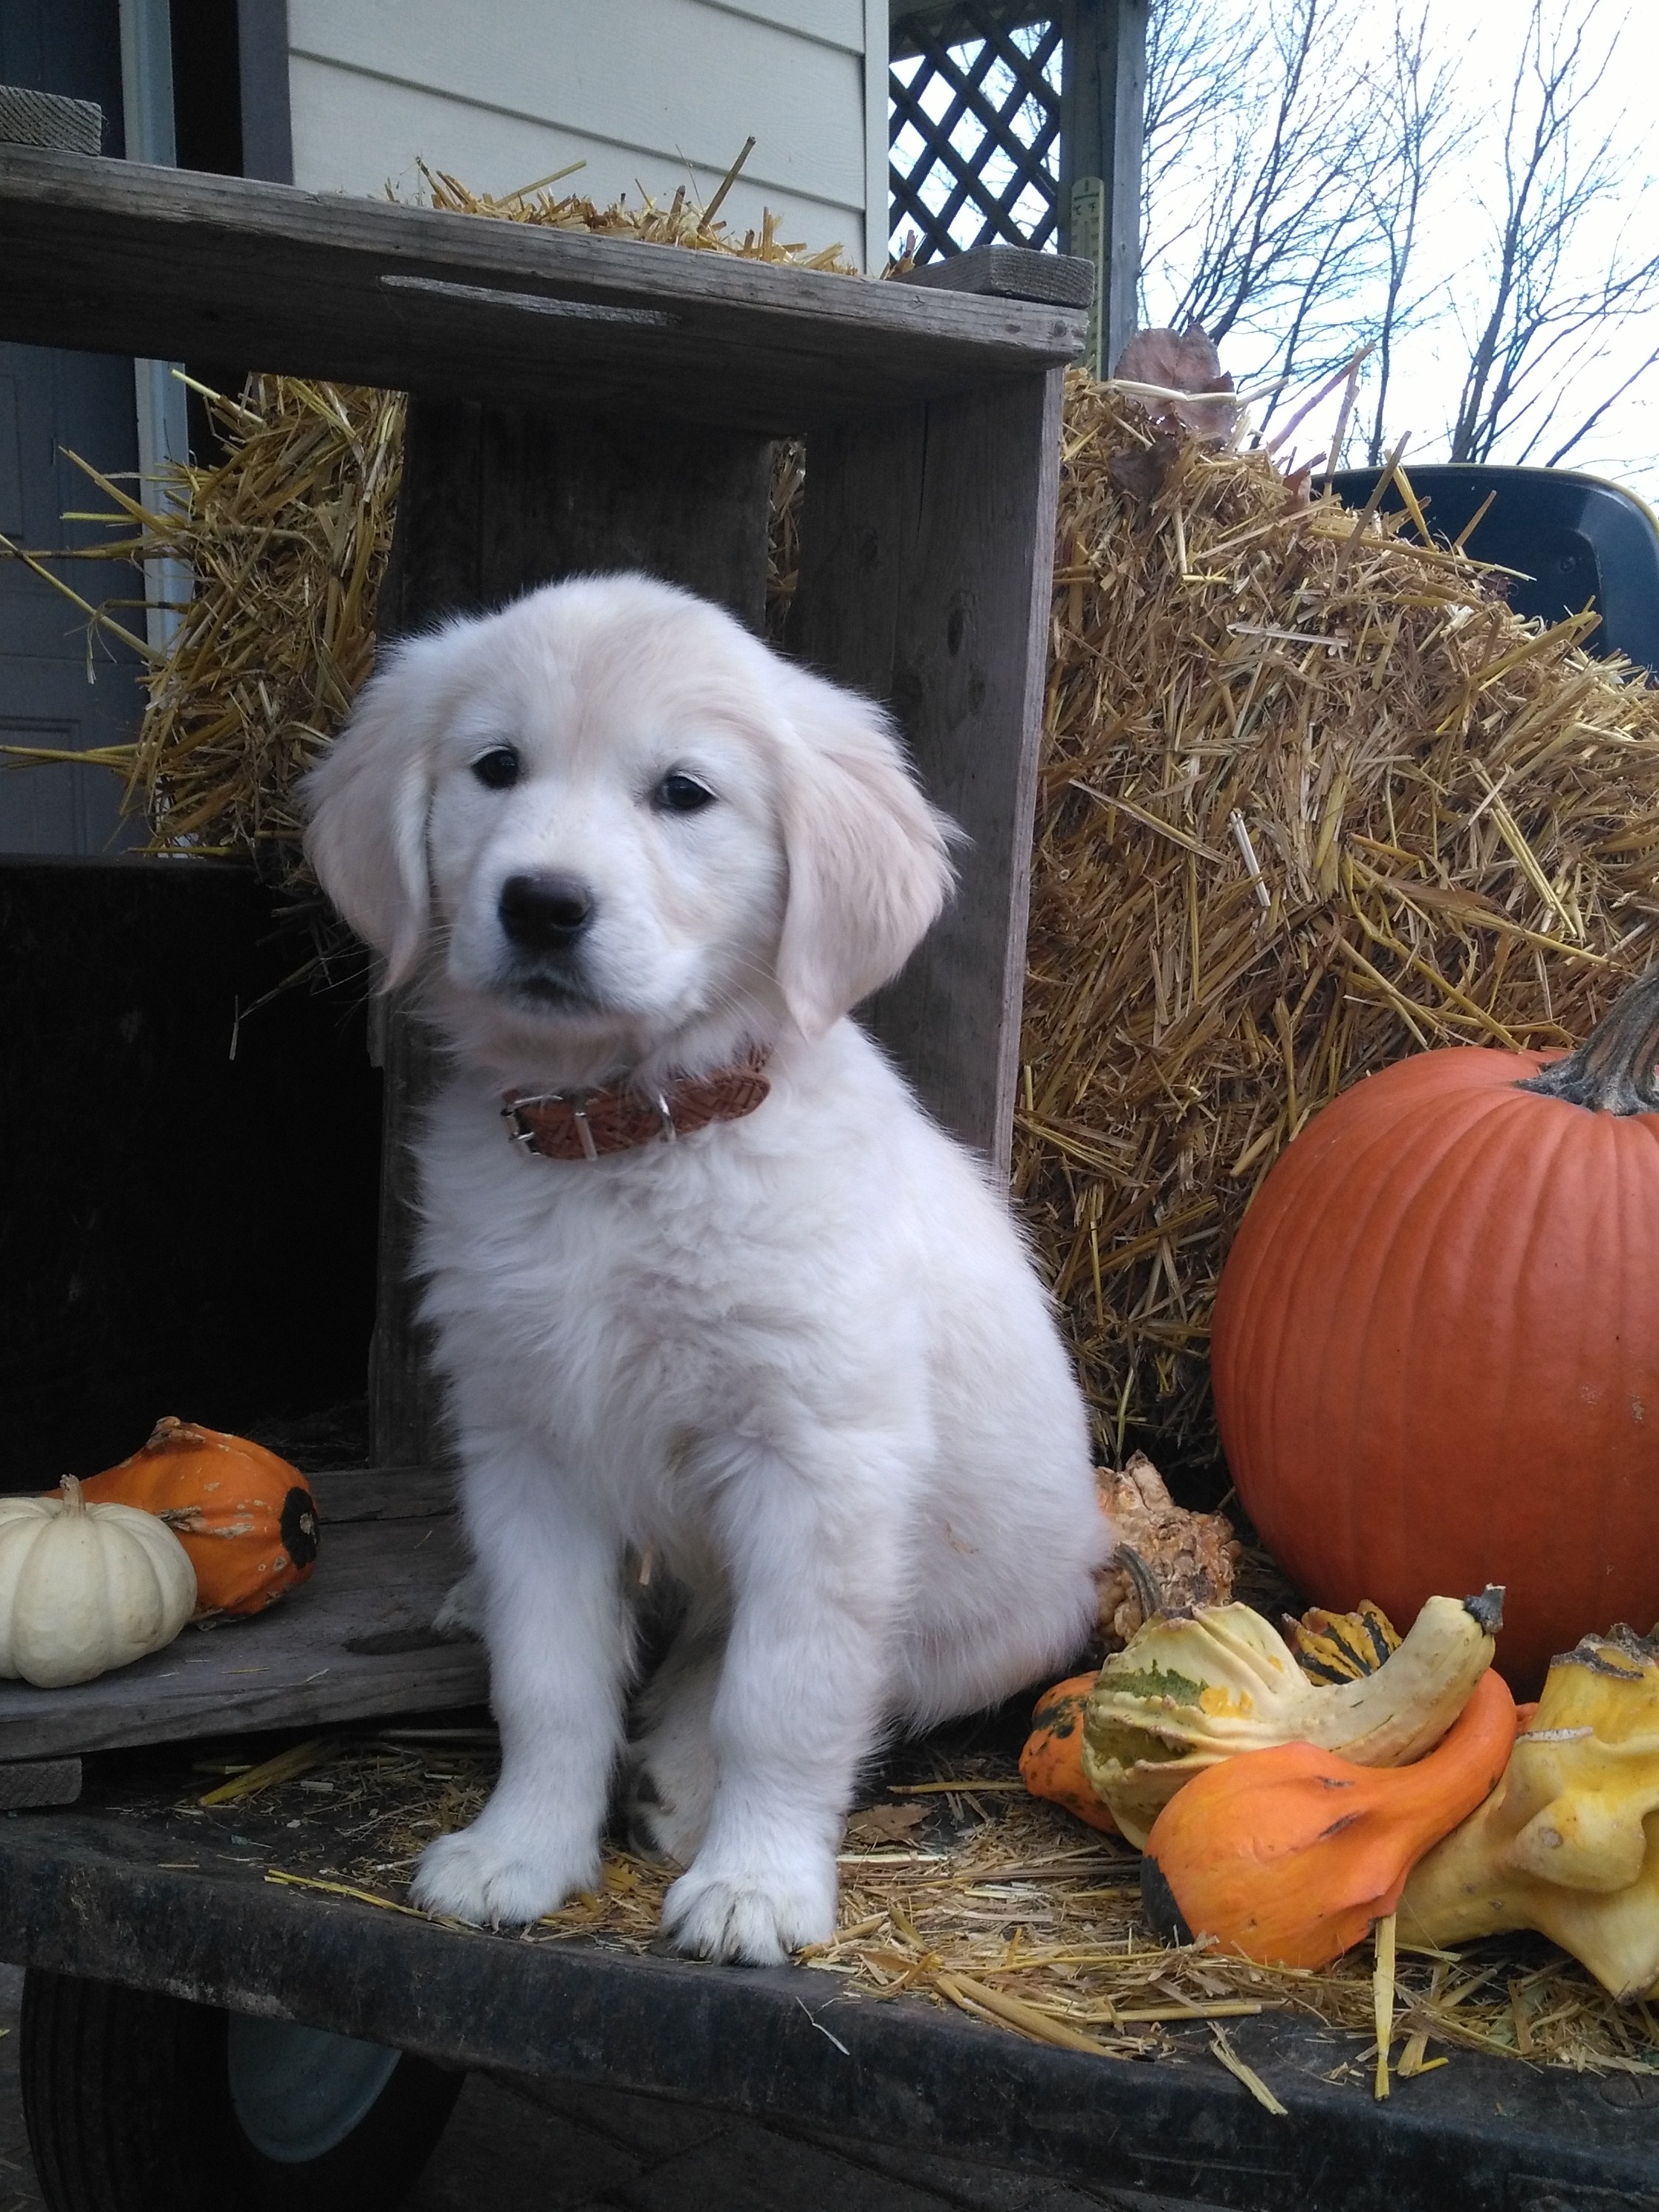  Golden retriever puppy sitting by pumpkins in the fall at Crosshill Doodles near Toronto, ON 